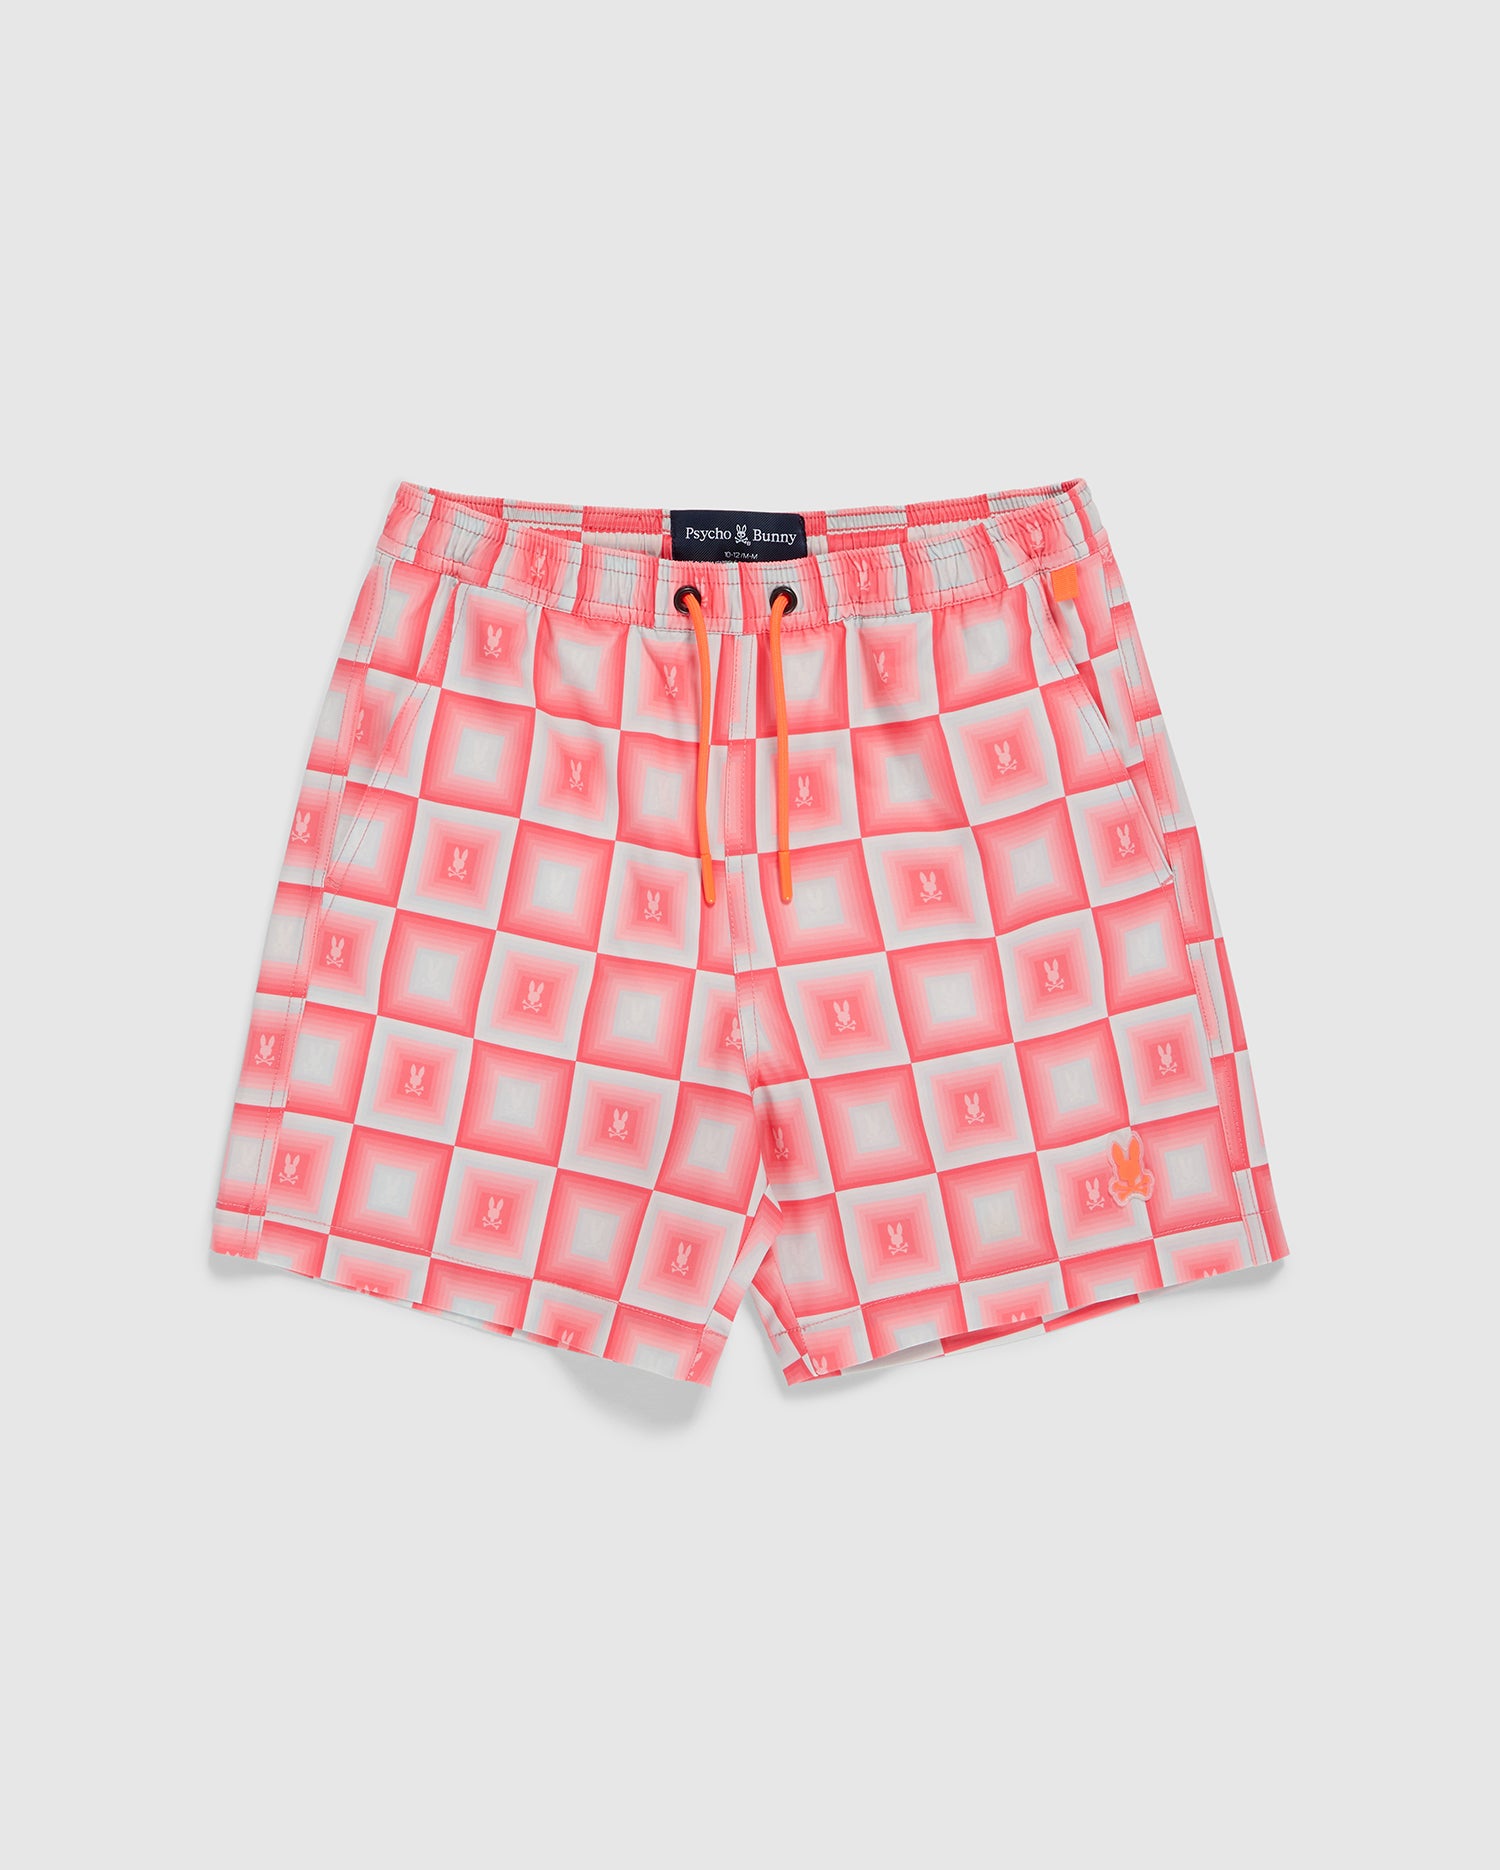 Pink and white gradient swim trunks with a bold geometric square pattern. These quick-drying fabric shorts feature an elastic waistband with an orange drawstring and a small logo on the left leg. Introducing the KIDS UTICA SWIM TRUNK - B0W399B2SW by Psycho Bunny.